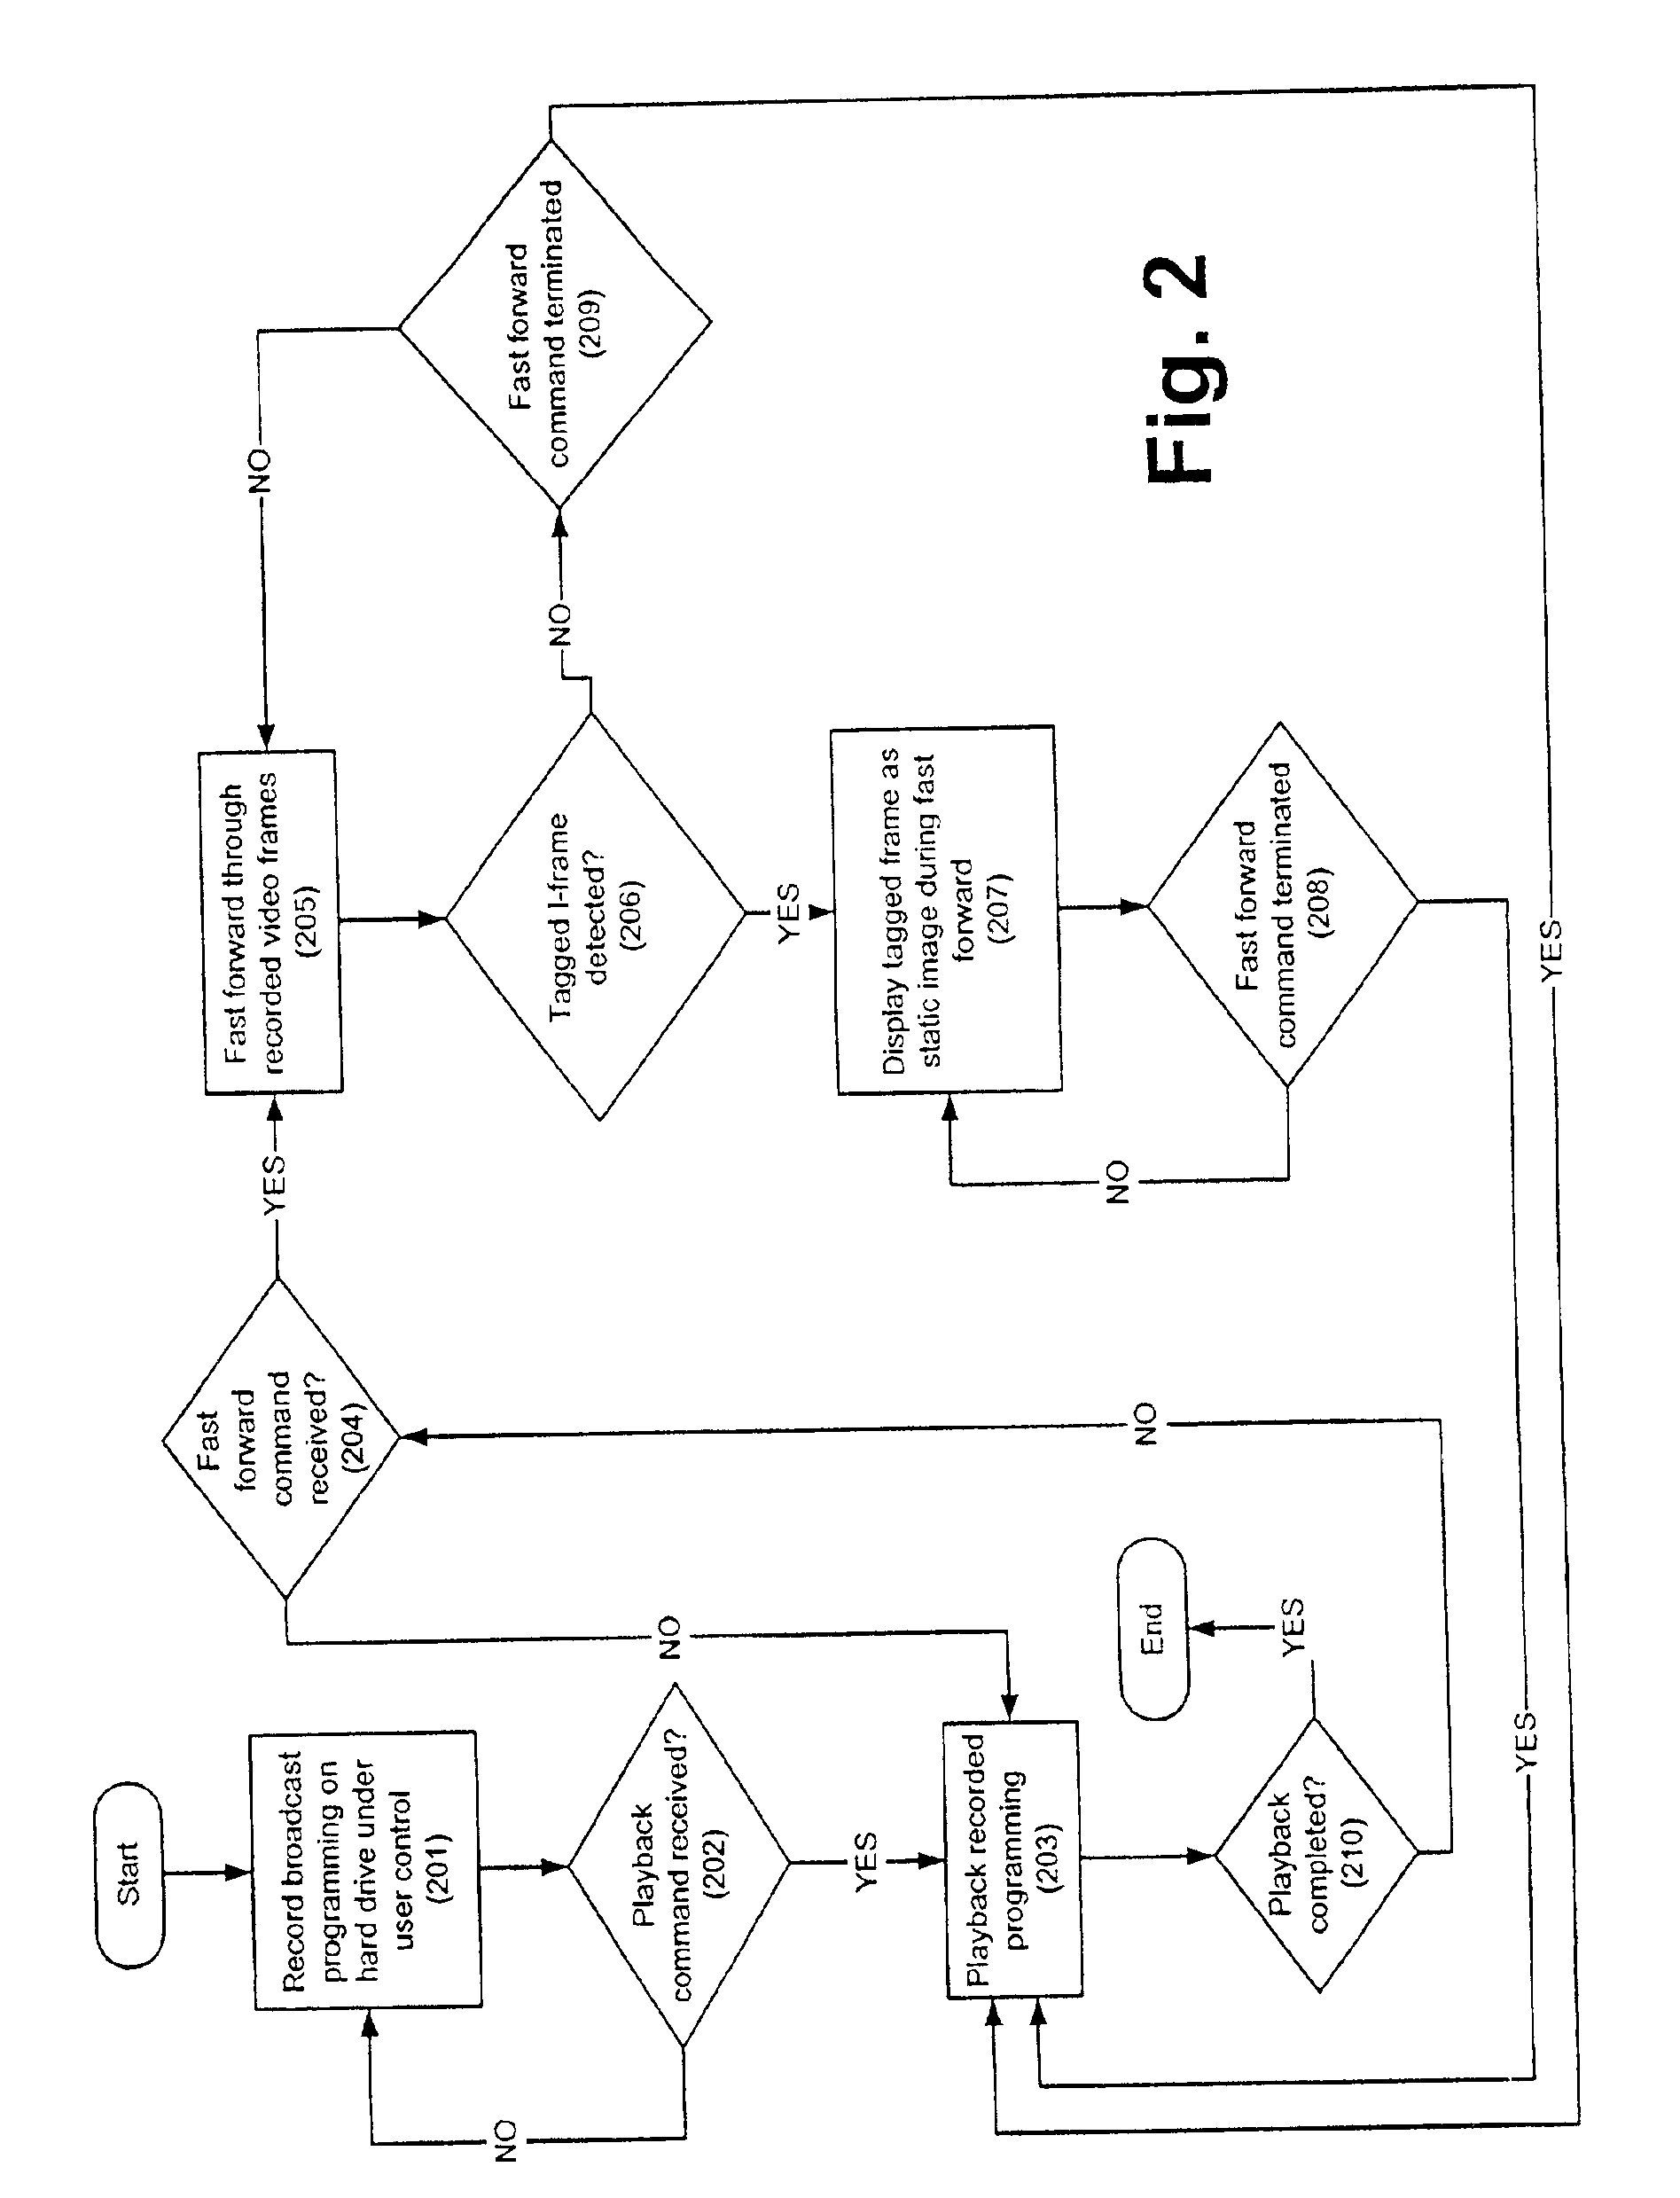 Method and system for providing alternative, less-intrusive advertising that appears during fast forward playback of a recorded video program